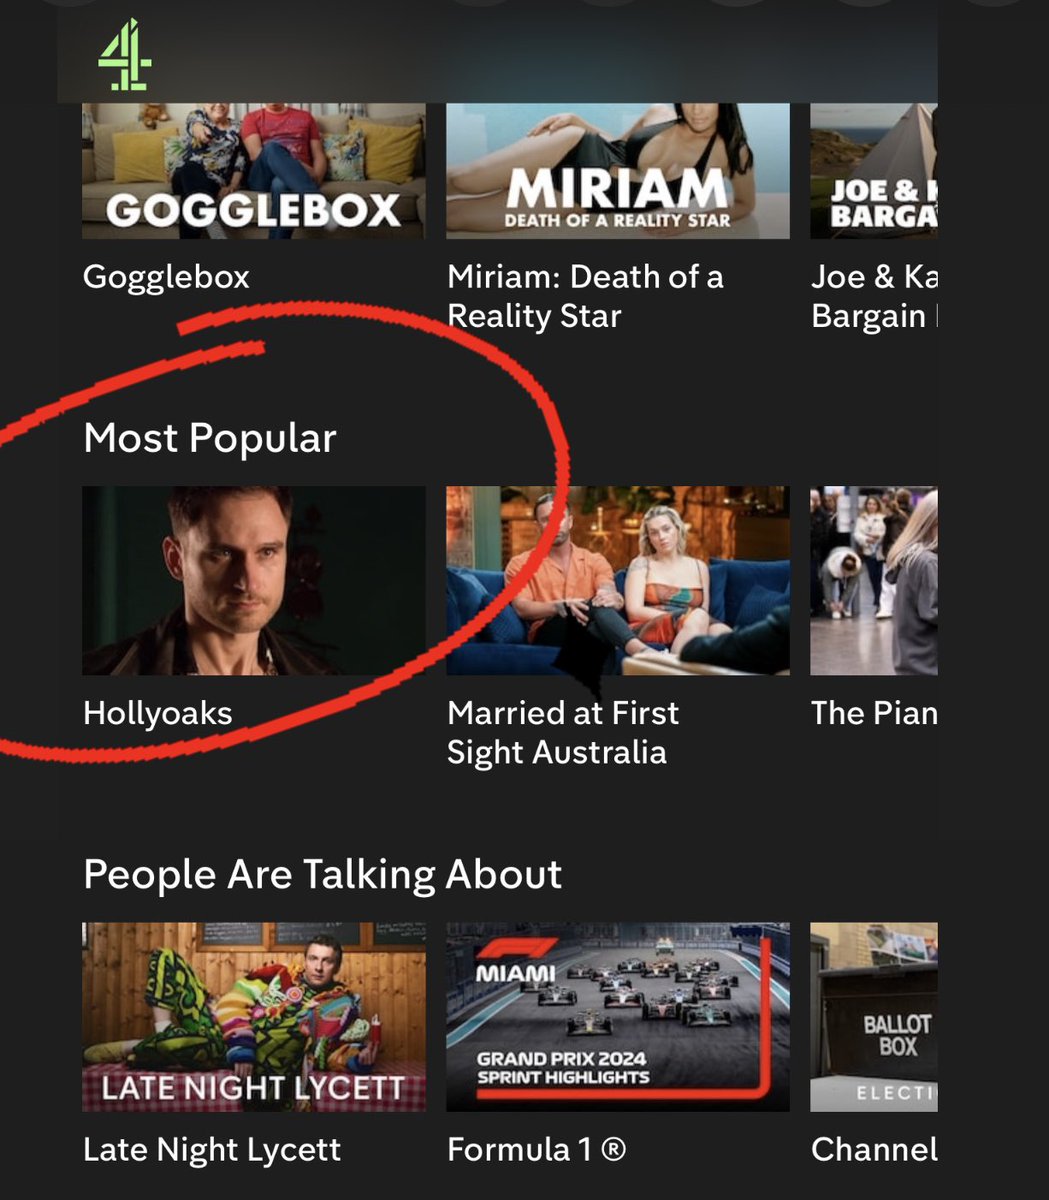 After an absolutely incredible week (and year, let’s be real), #Hollyoaks has quite rightly claimed the top spot of Channel 4 streaming’s Most Popular section. 🥳 If you haven’t watched in a while then now is the perfect time to jump back in. It’s smashing.